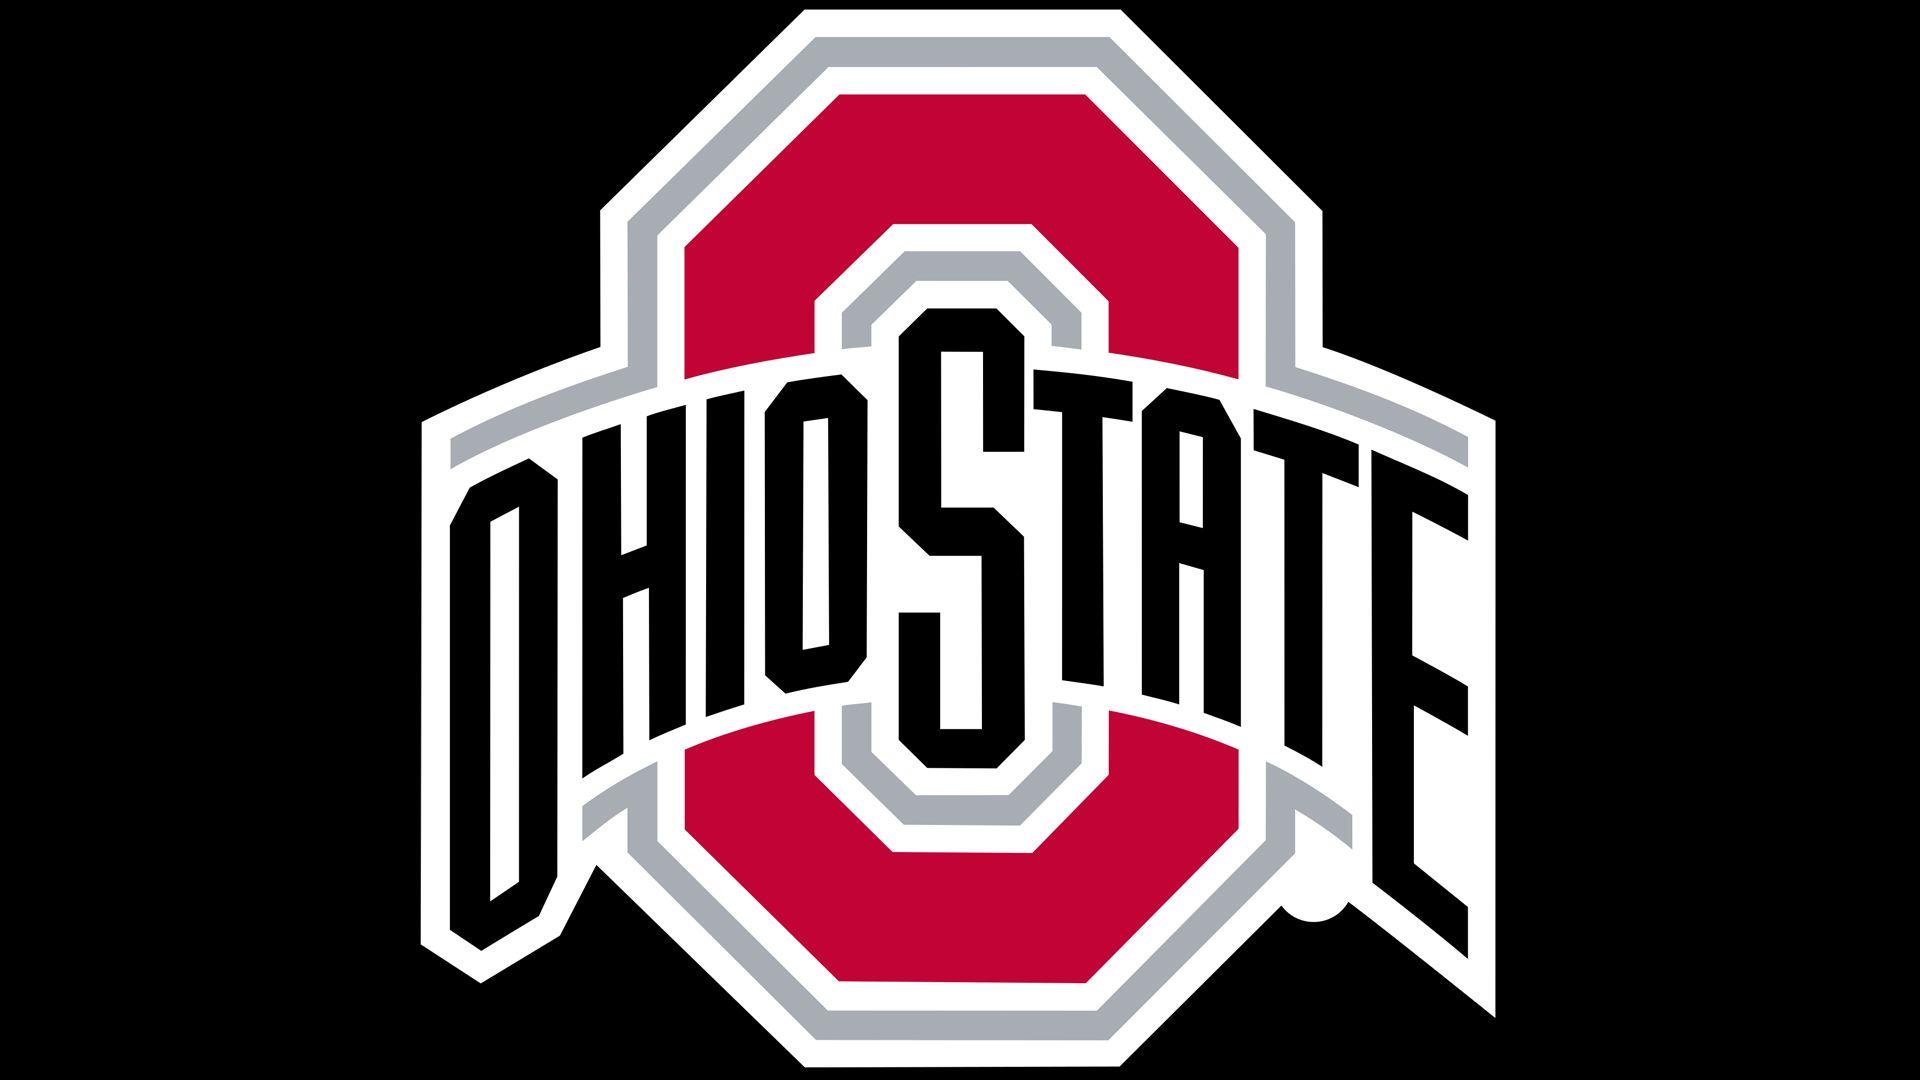 Ohio Logo - Meaning Ohio State logo and symbol | history and evolution